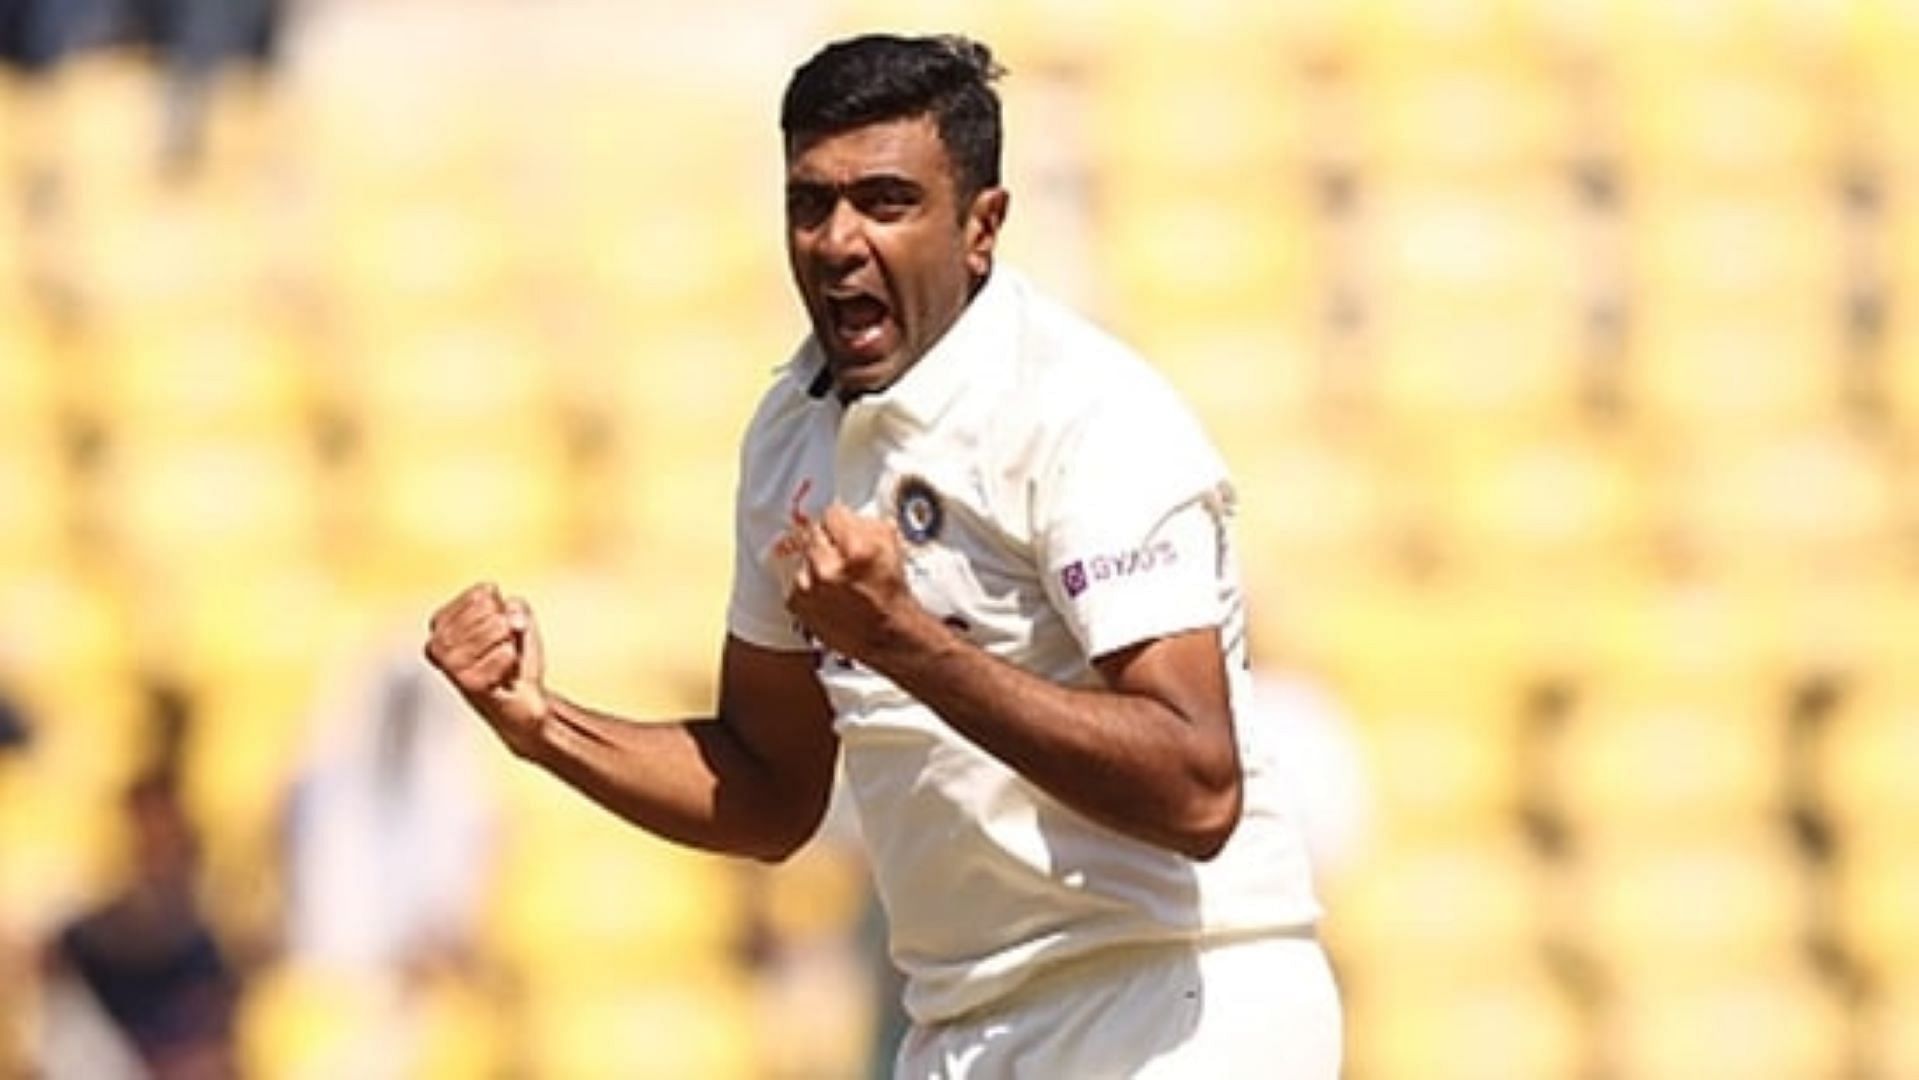 Ravichandran Ashwin moved a step closer to the 700-wicket mark on Day 1